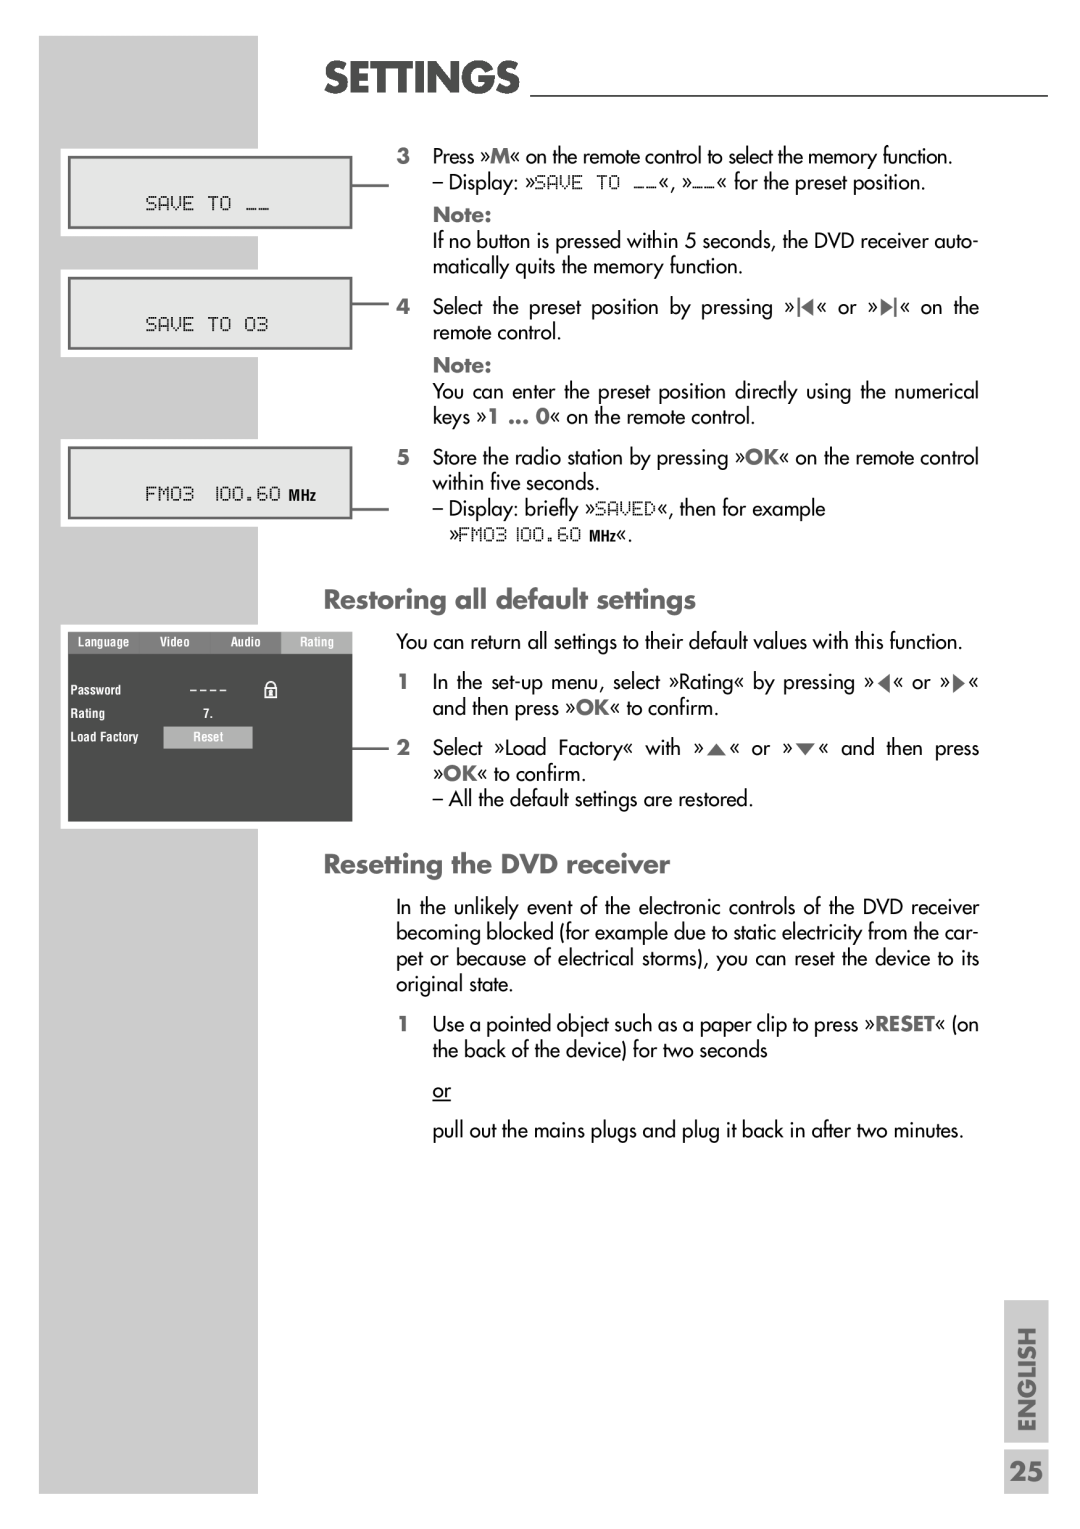 Grundig DR 3400 DD manual Restoring all default settings, Resetting the DVD receiver, English 